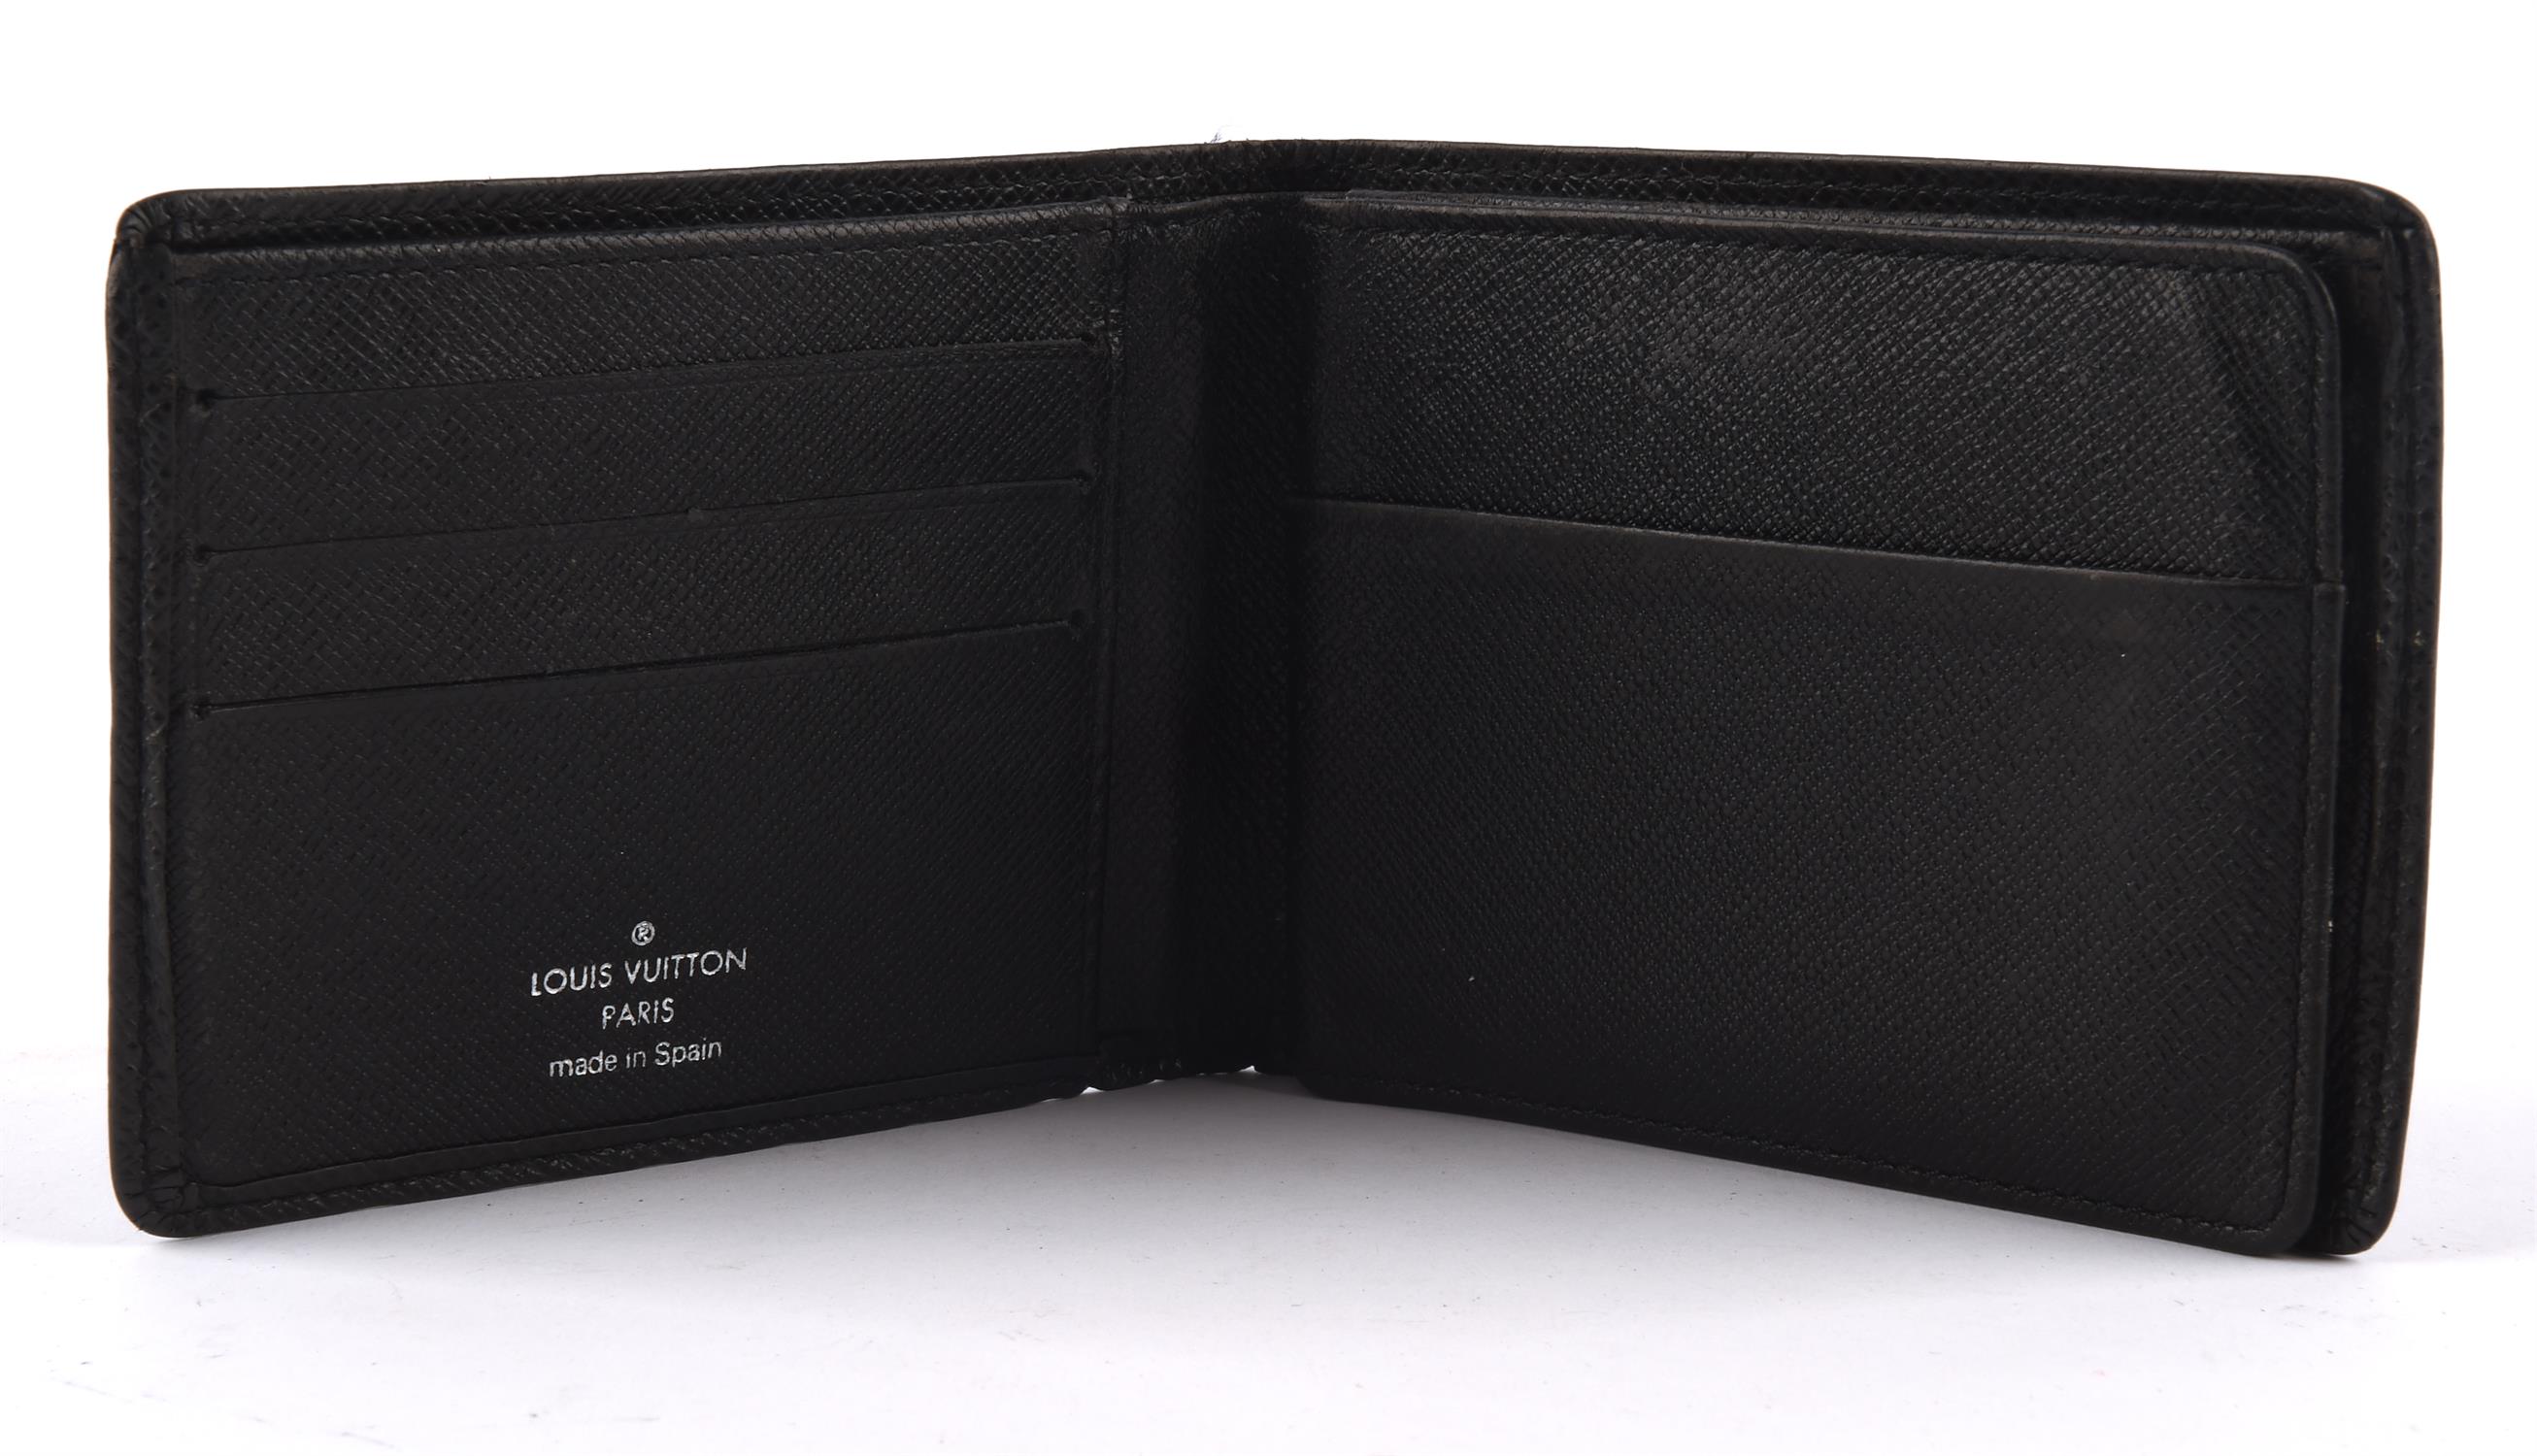 LOUIS VUITTON boxed black trifold leather wallet RRP £680 - Image 2 of 3